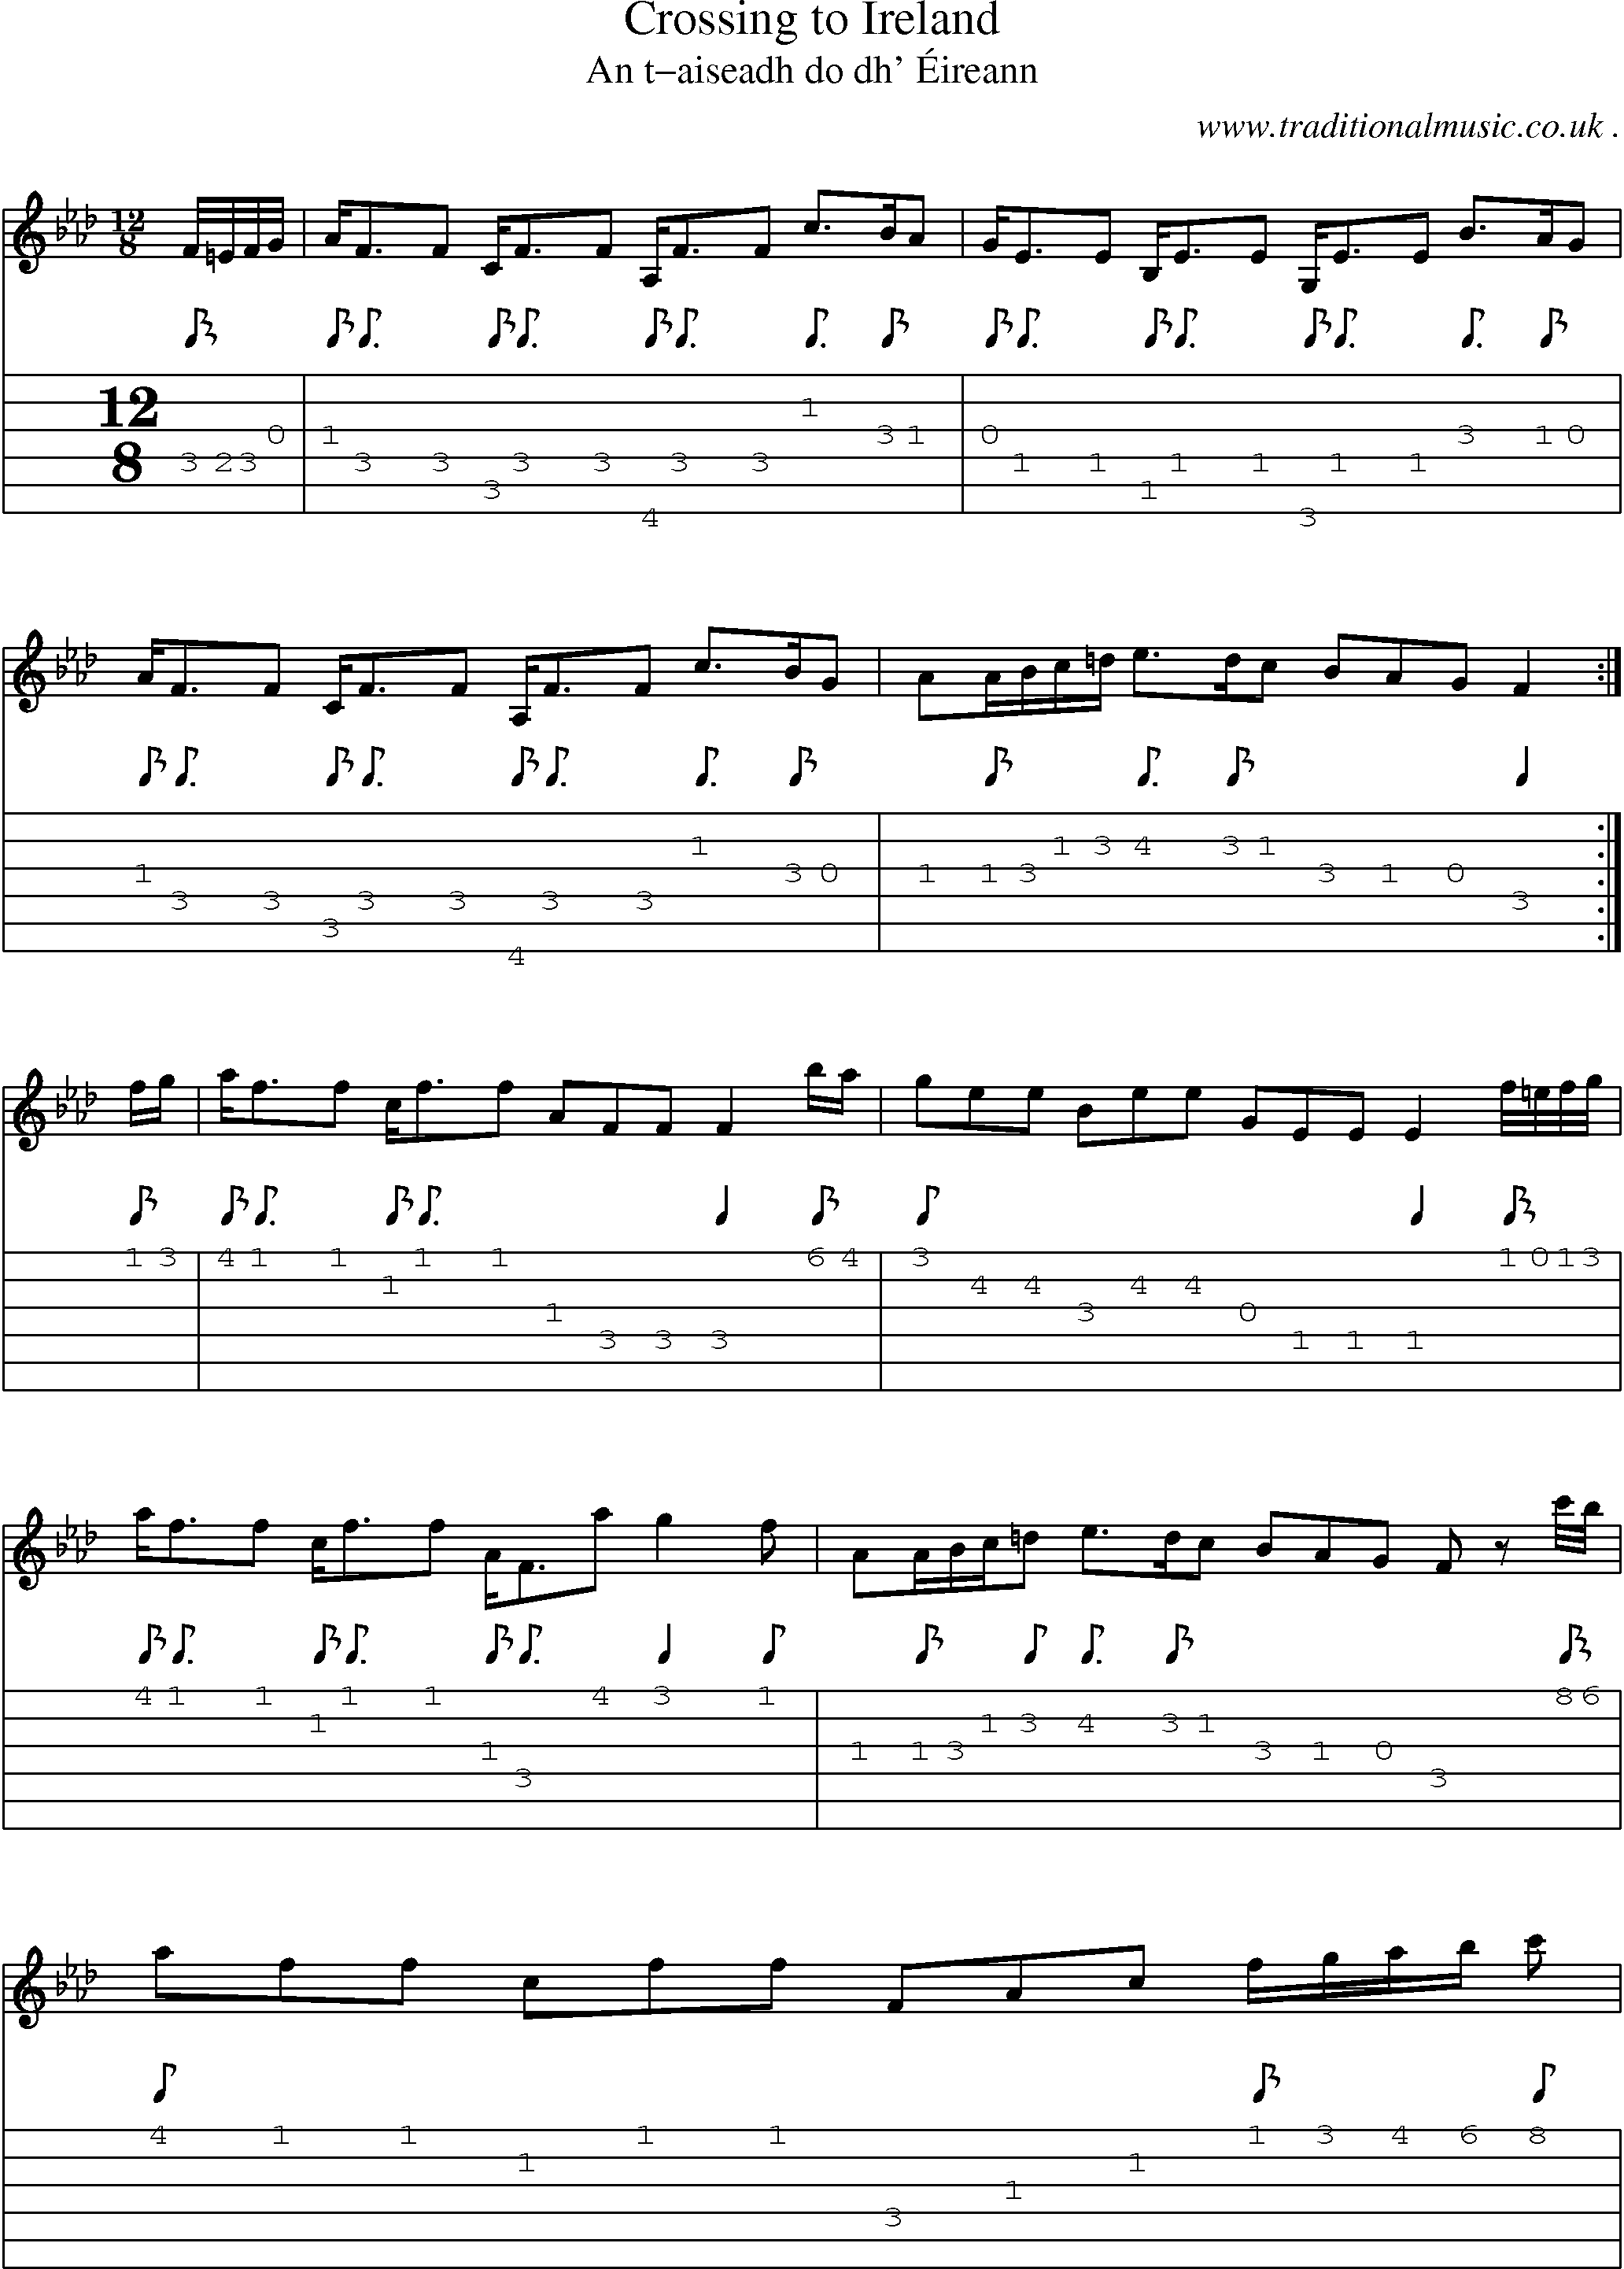 Sheet-music  score, Chords and Guitar Tabs for Crossing To Ireland